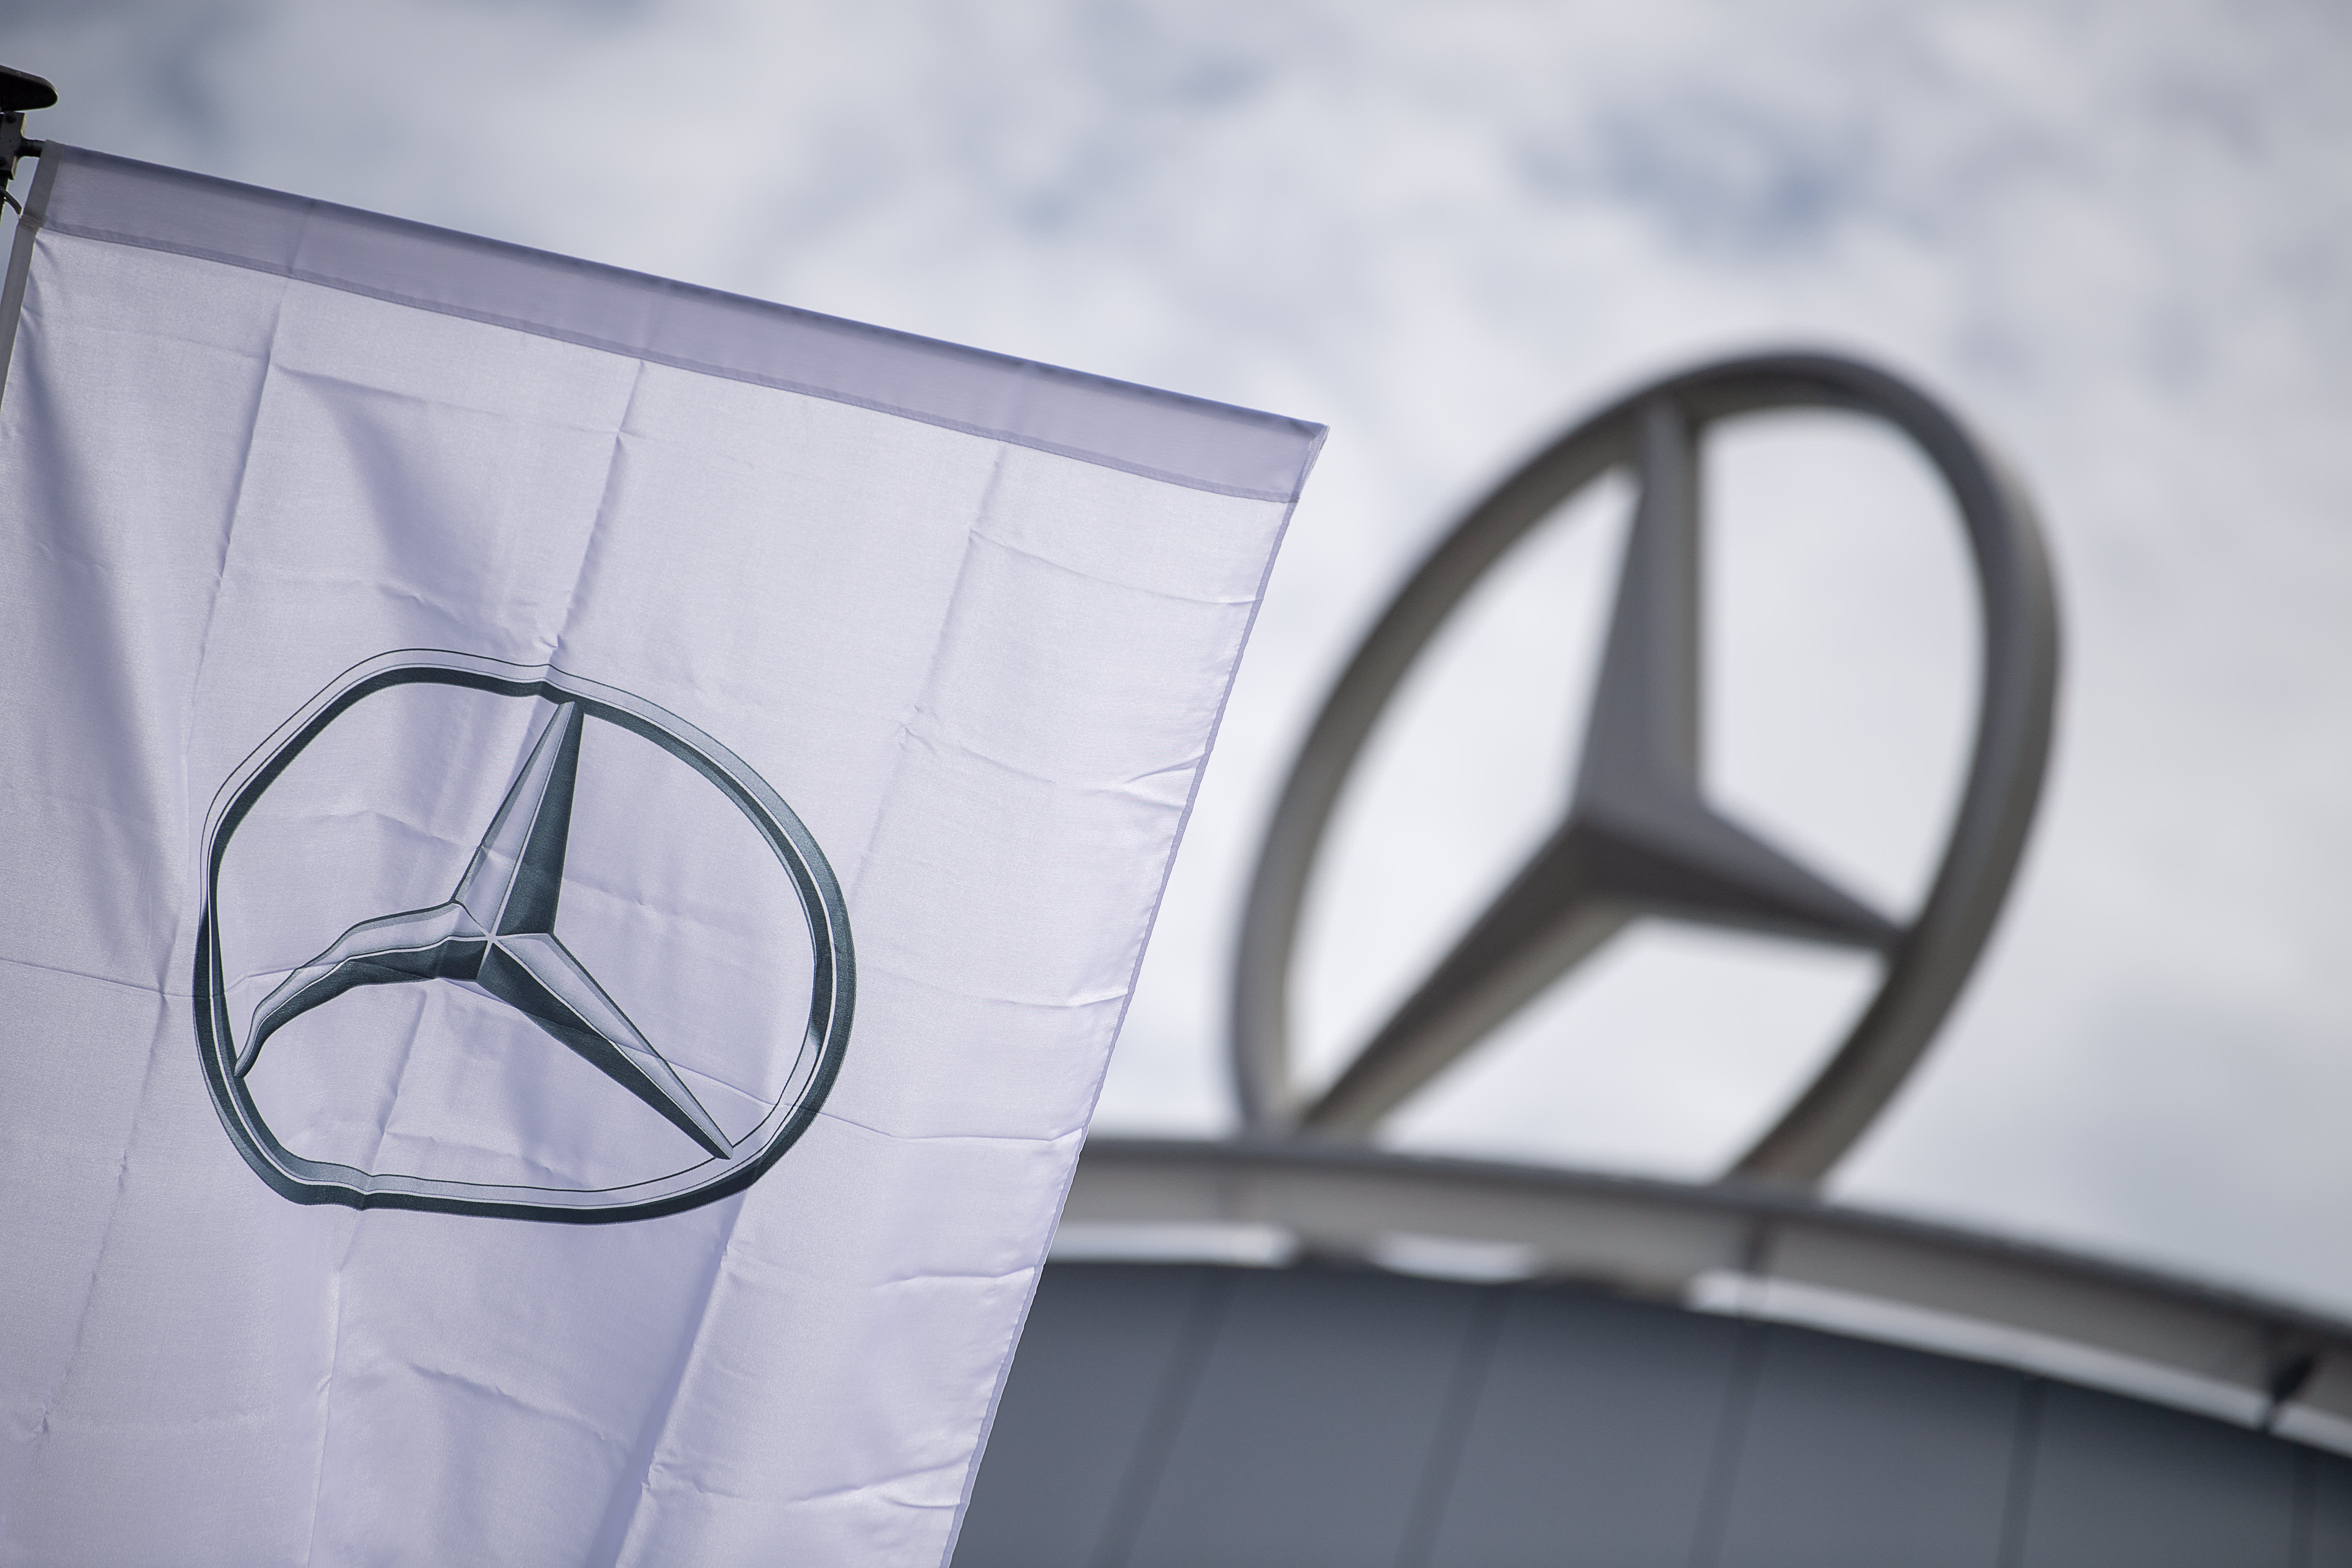 Daimler CEO expects 'intense competition' if Apple and Alibaba enter electric vehicle market